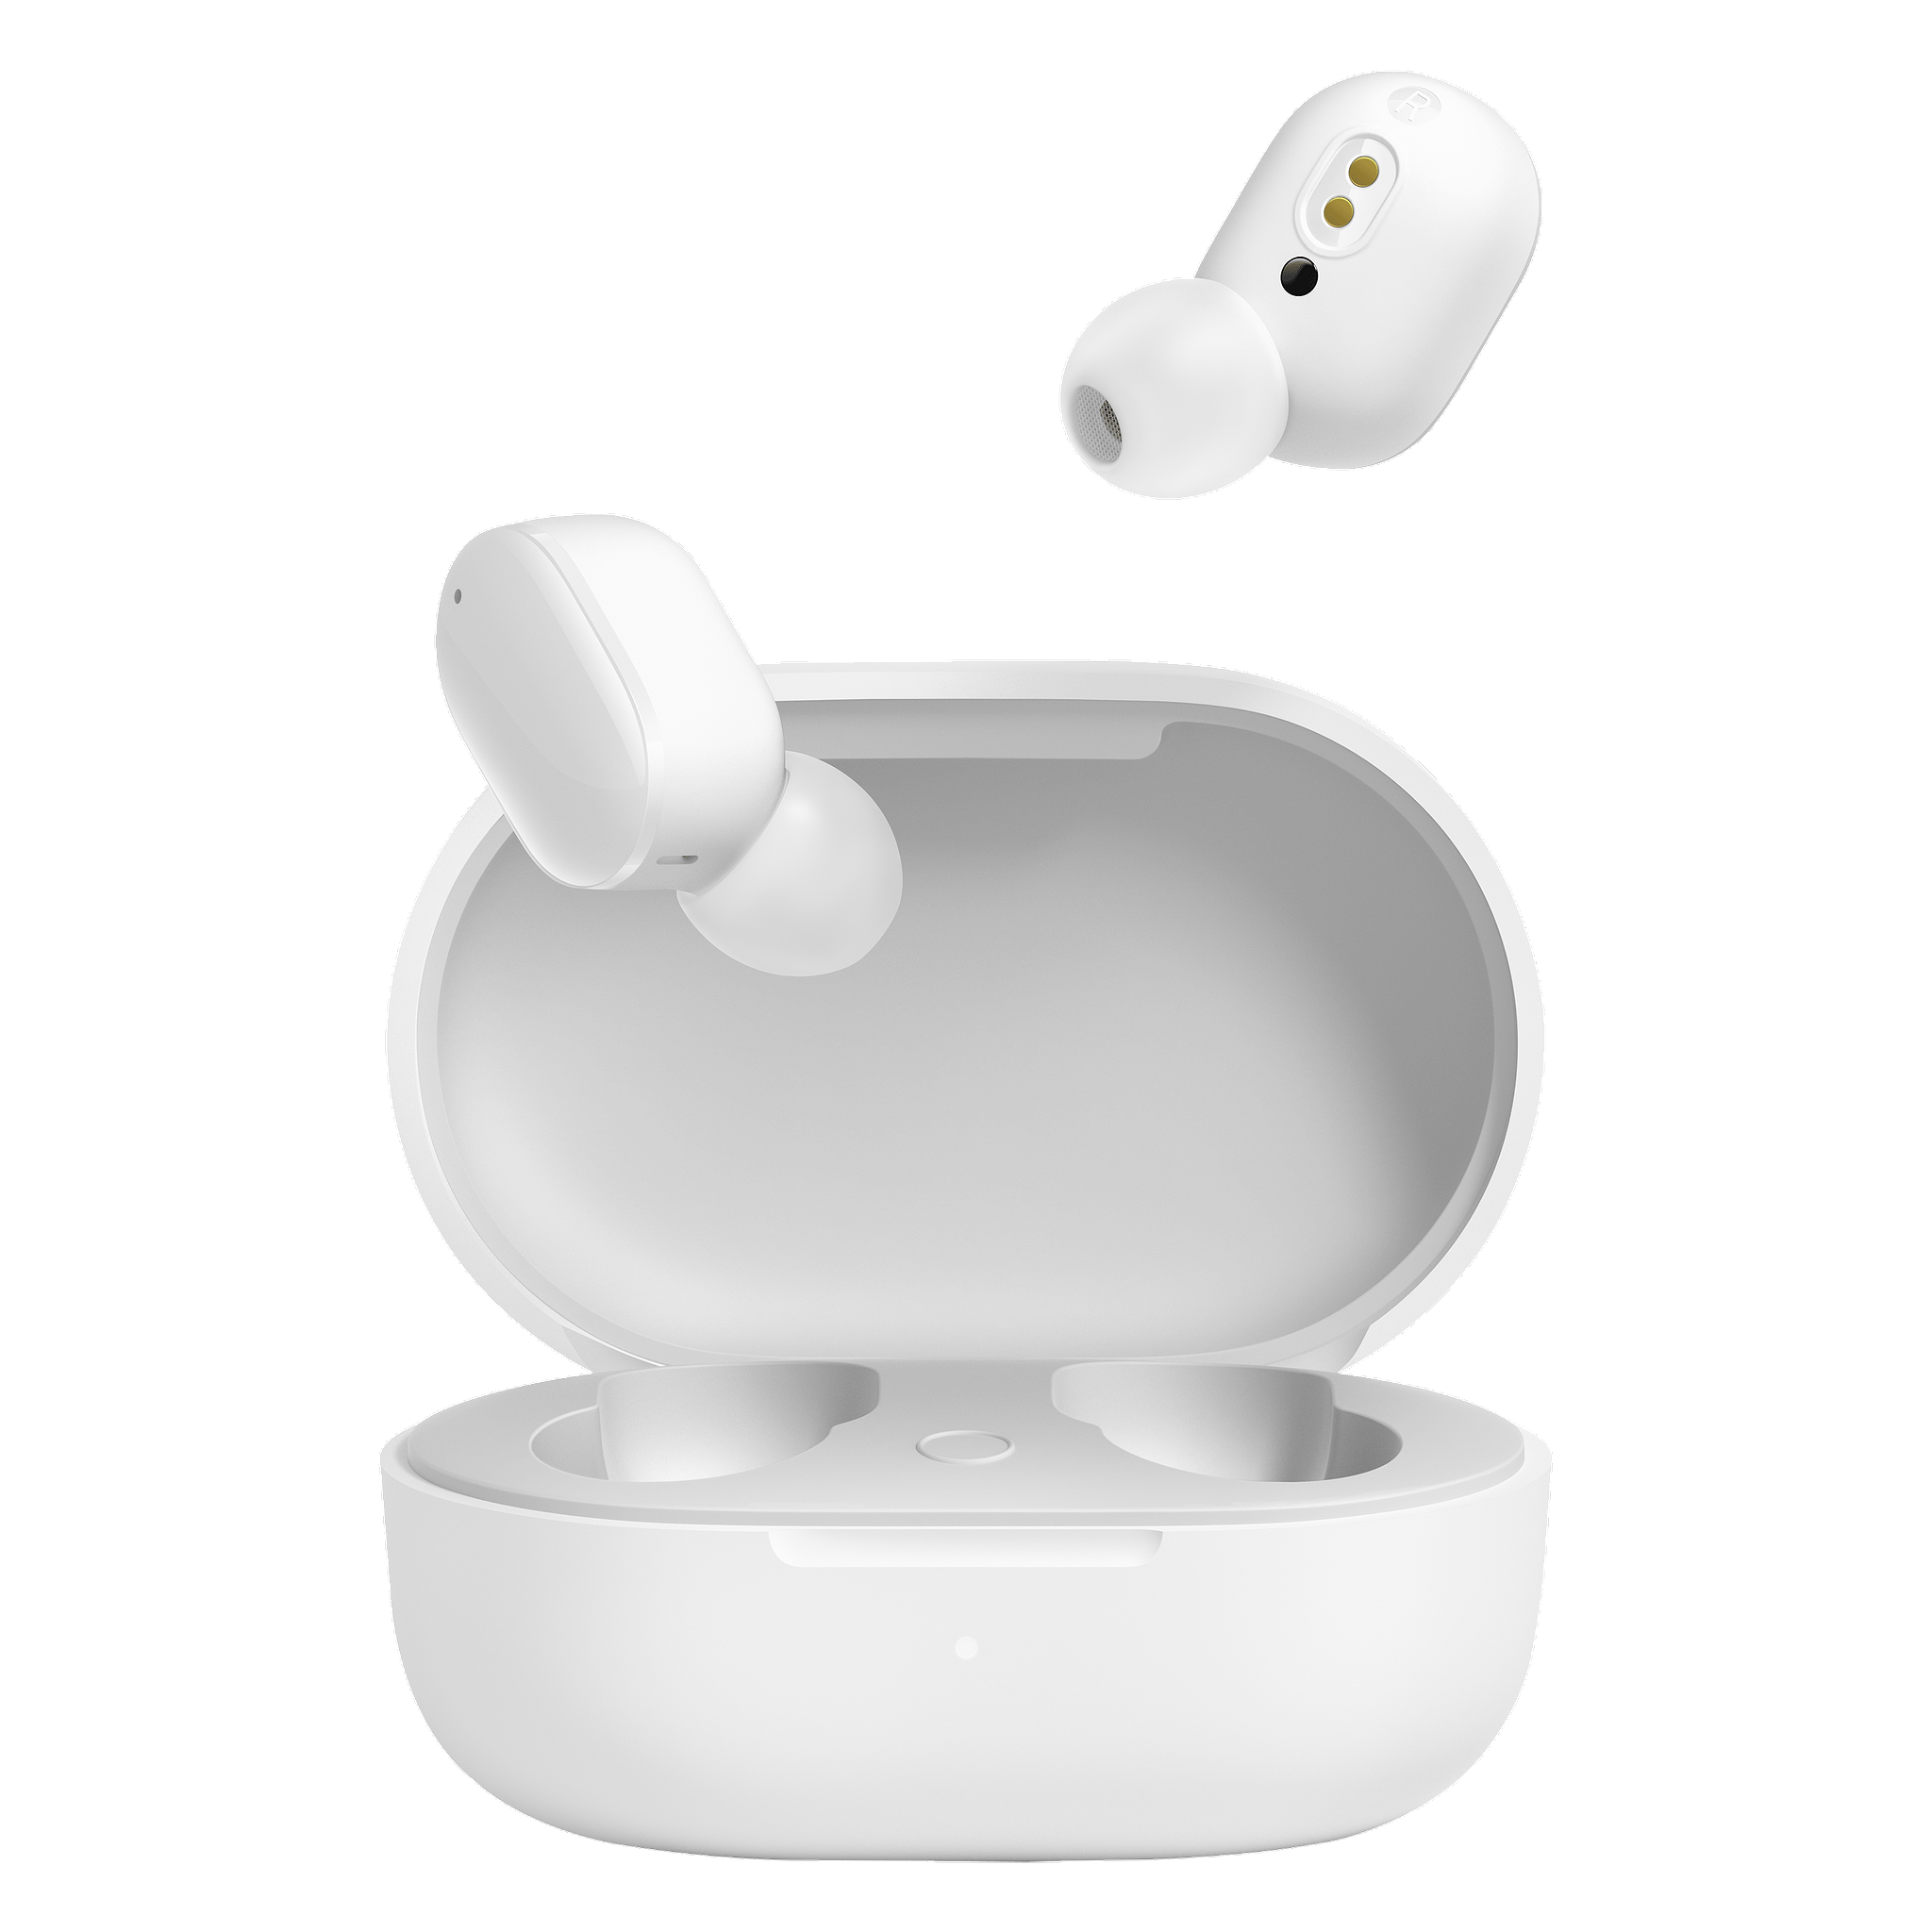 Redmi Earbuds 3 Pro TWSEJ08LS In-Ear Passive Noise Cancellation Truly Wireless Earbuds